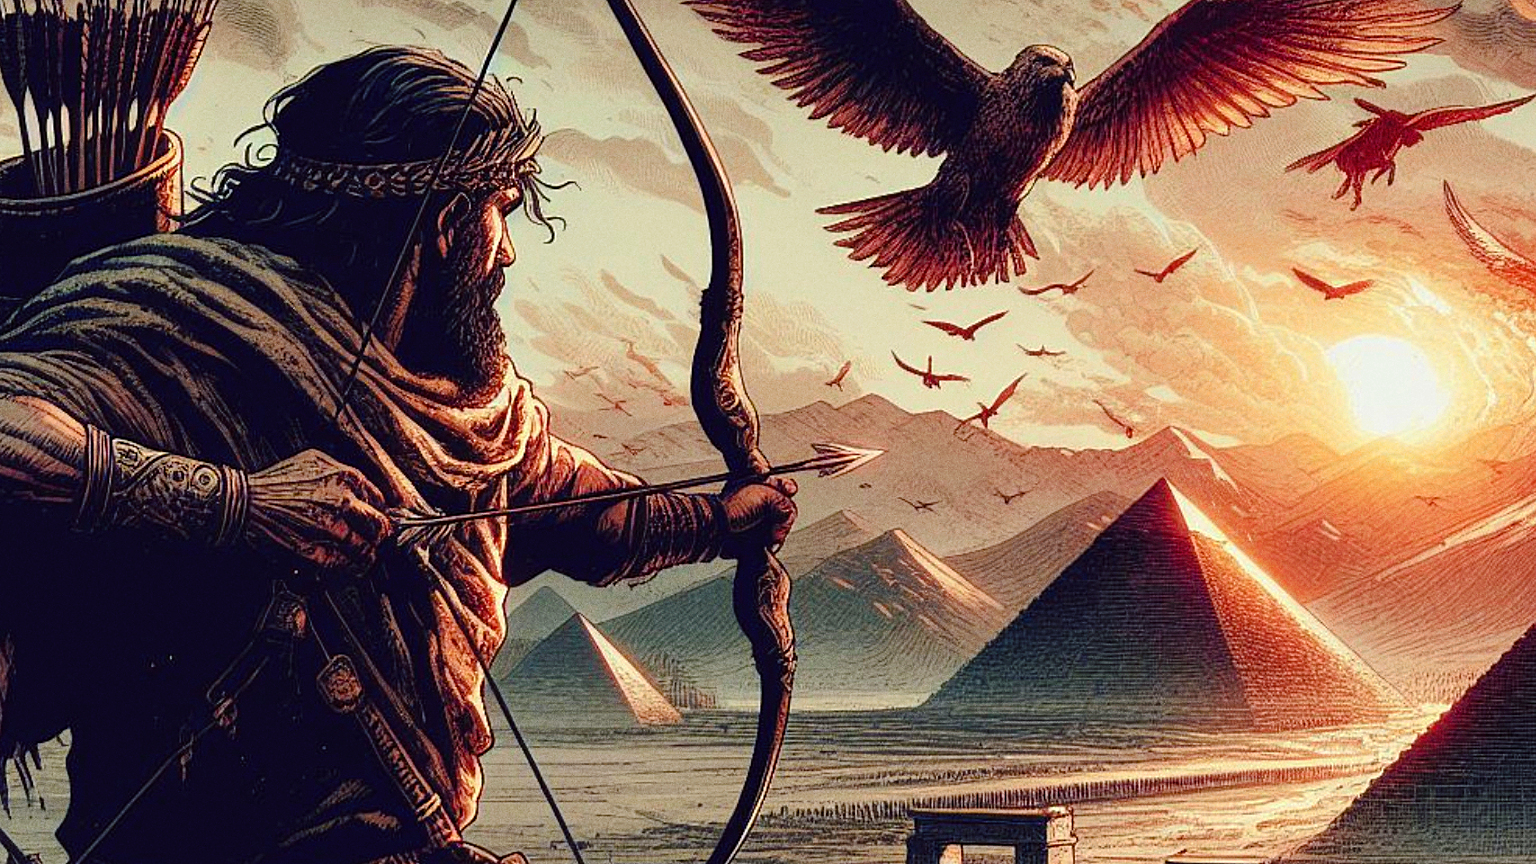 General 1536x864 art installation desert book characters Holy Bible Saga Aesthetics of Hate (ULTRAKILL) Desert Eagle book cover pyramid natural light bow and arrow animals birds clouds sky sunset sunset glow